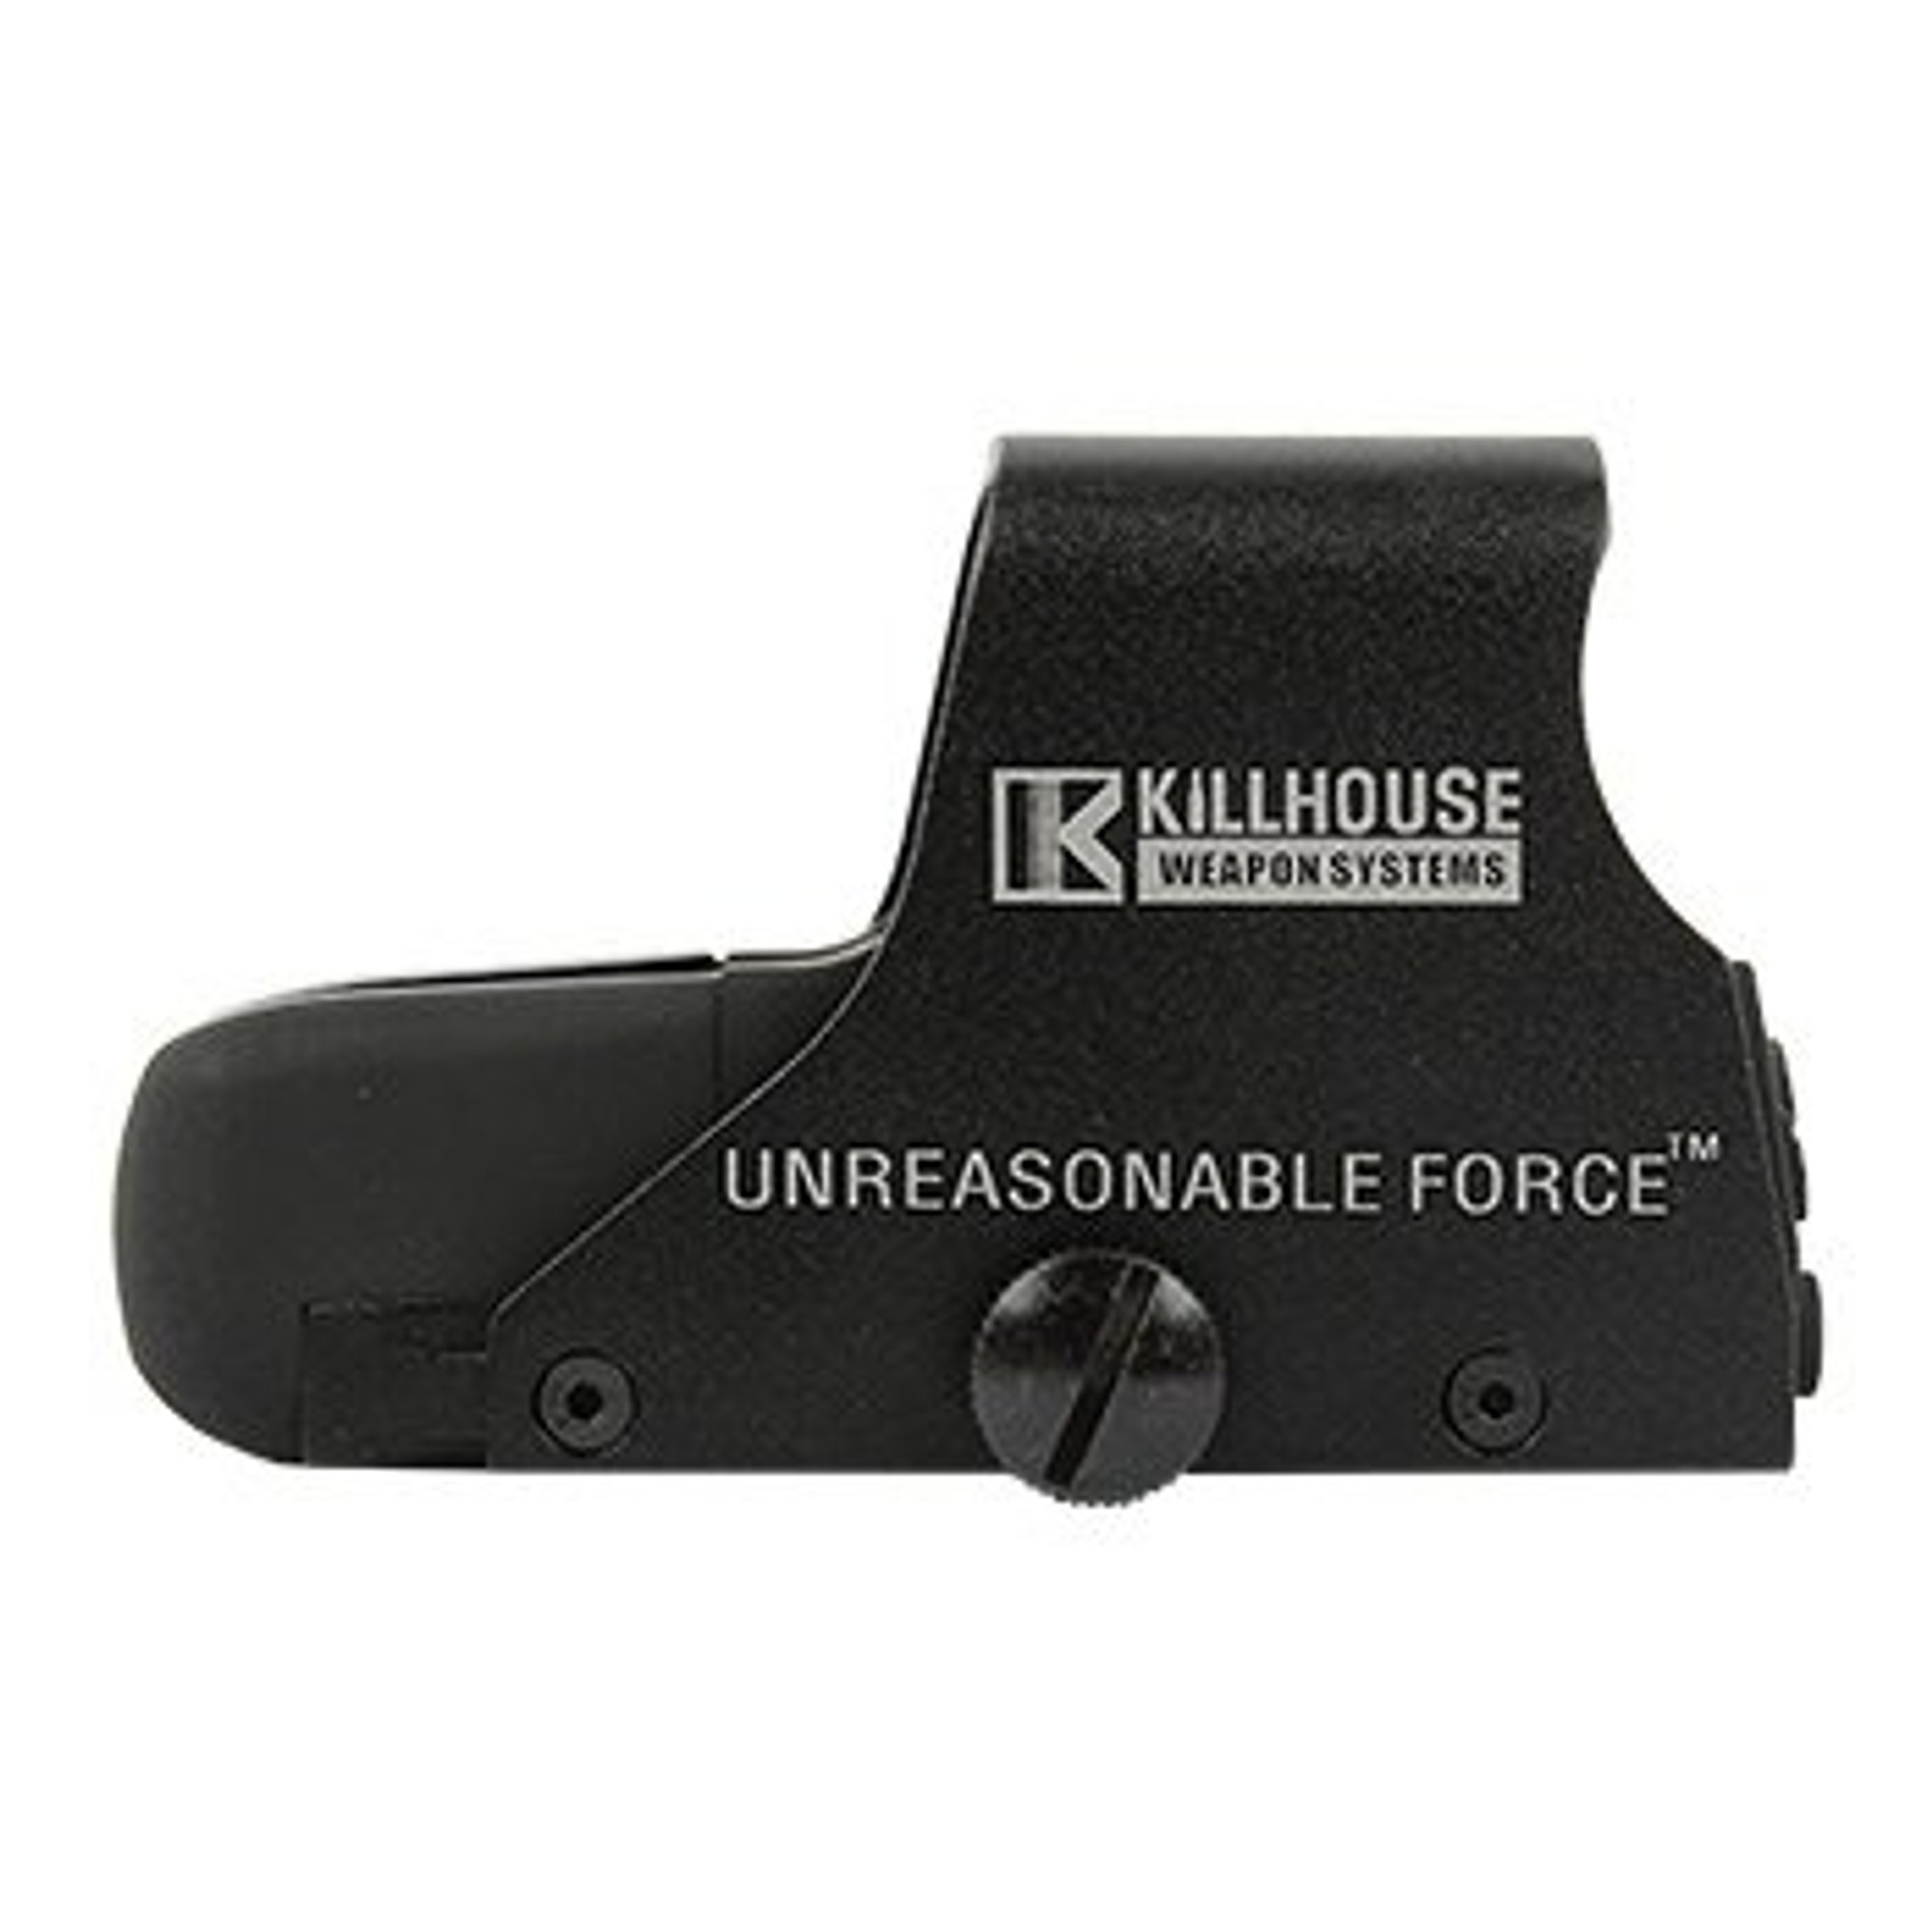 Killhouse Weapon Systems 551 Mock Holographic Sight